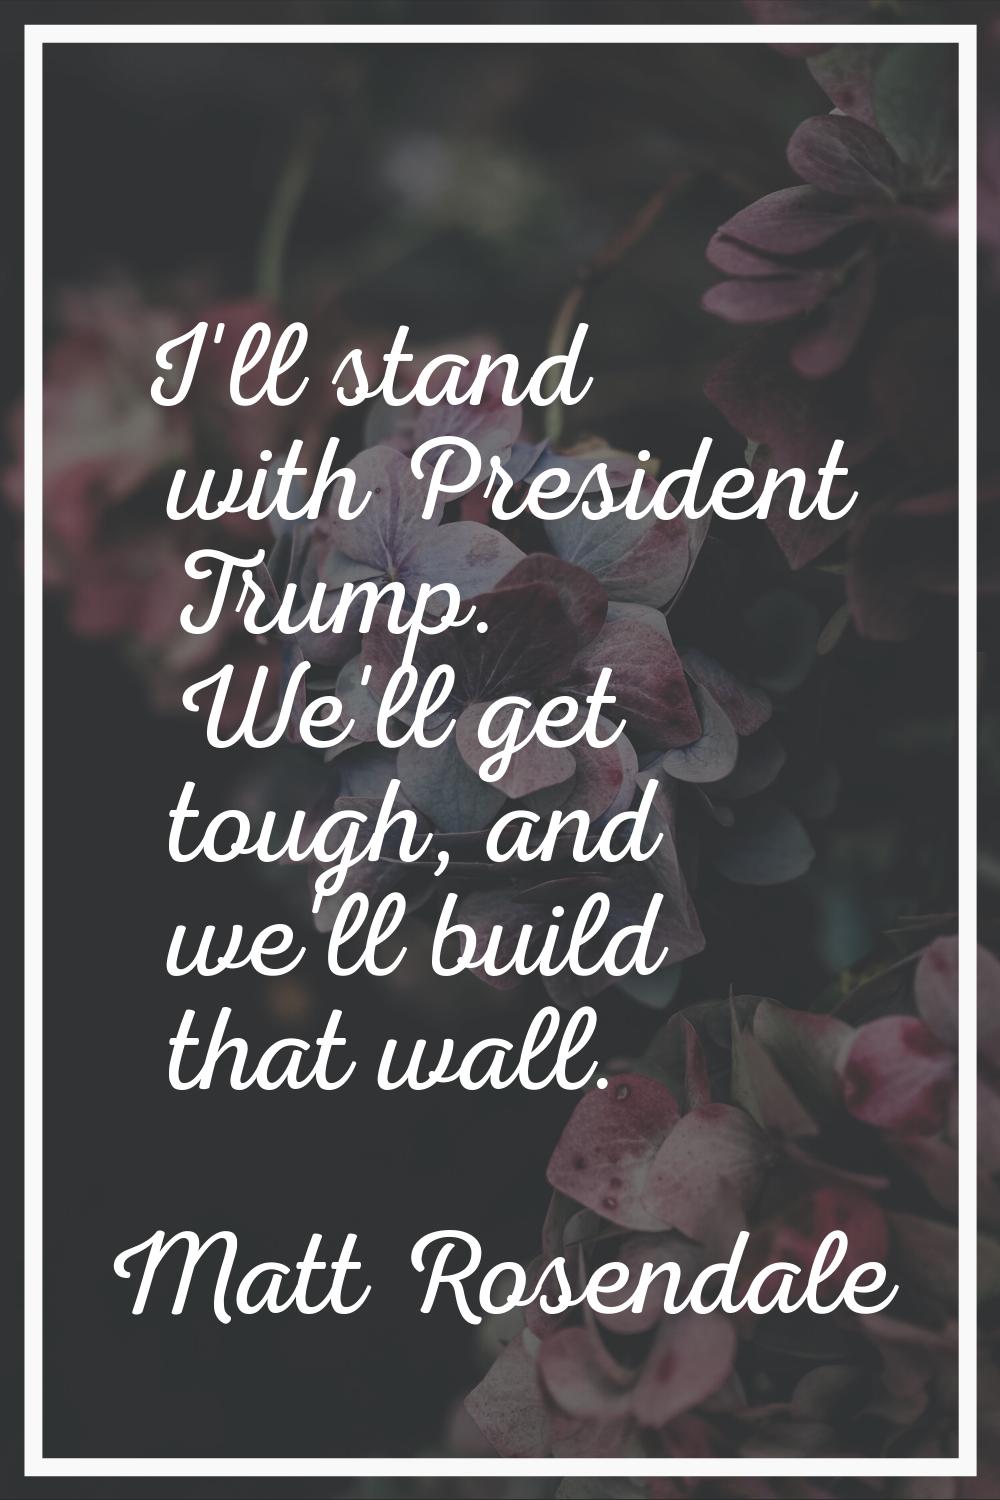 I'll stand with President Trump. We'll get tough, and we'll build that wall.